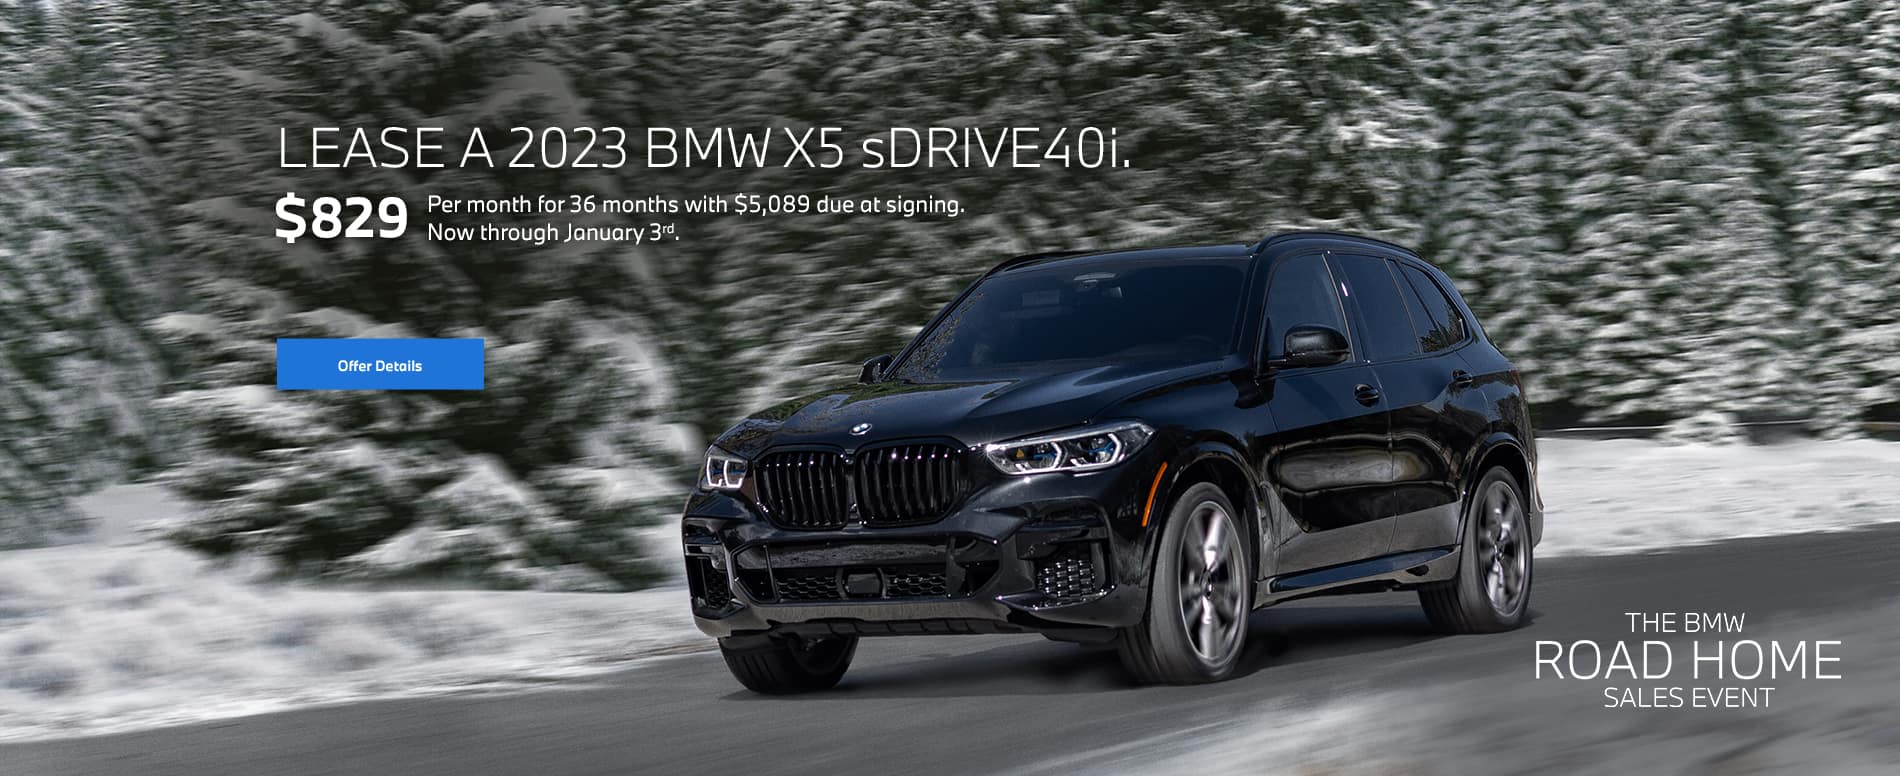 2023 X5 lease starting at $829 per month for 36 months